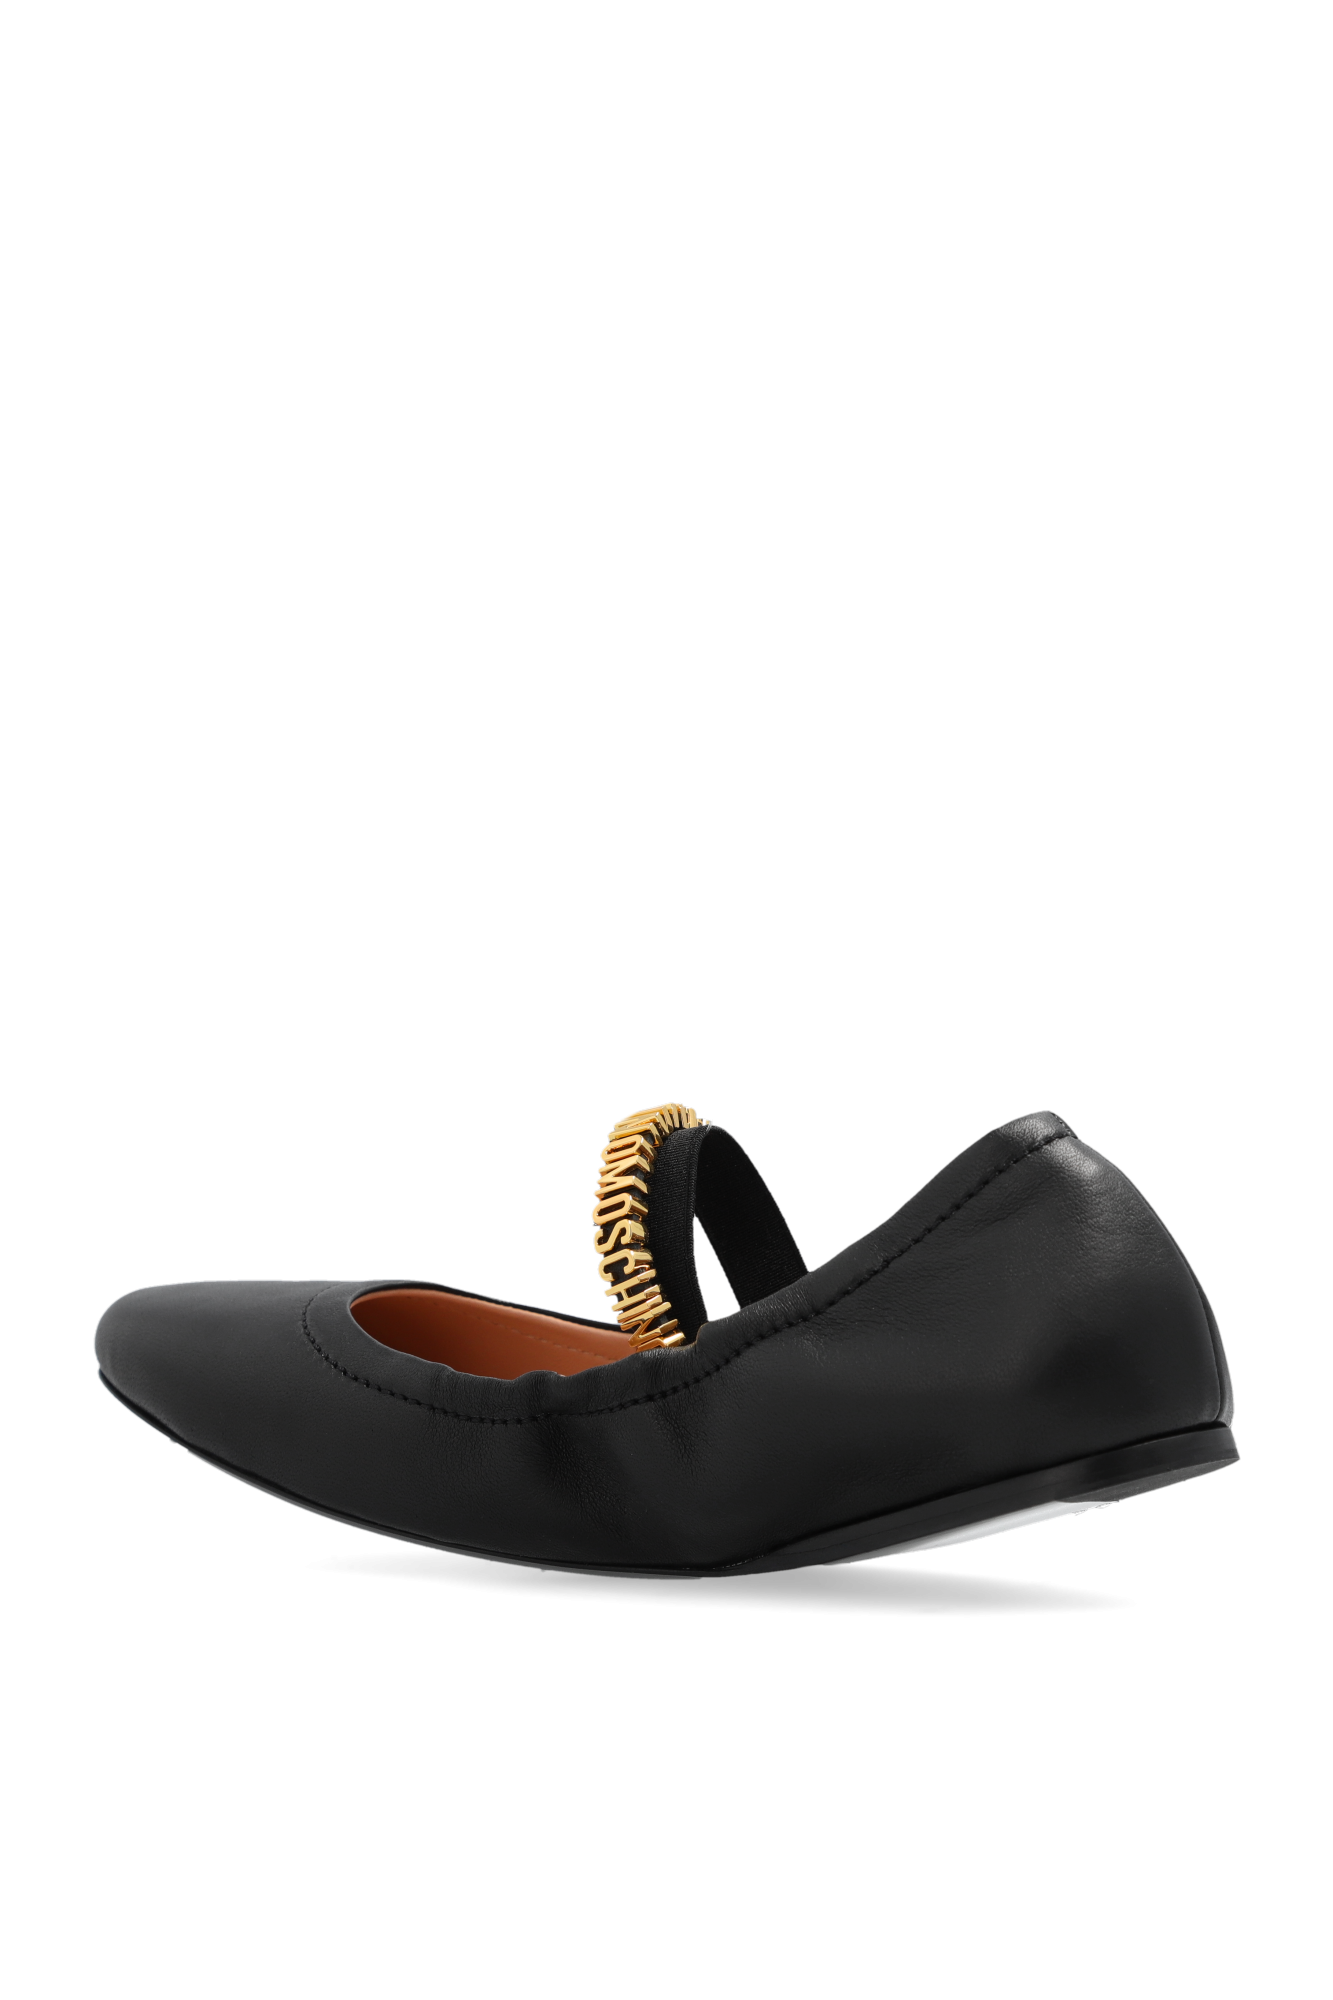 Moschino Issue 1 Shoes Core Black Mens